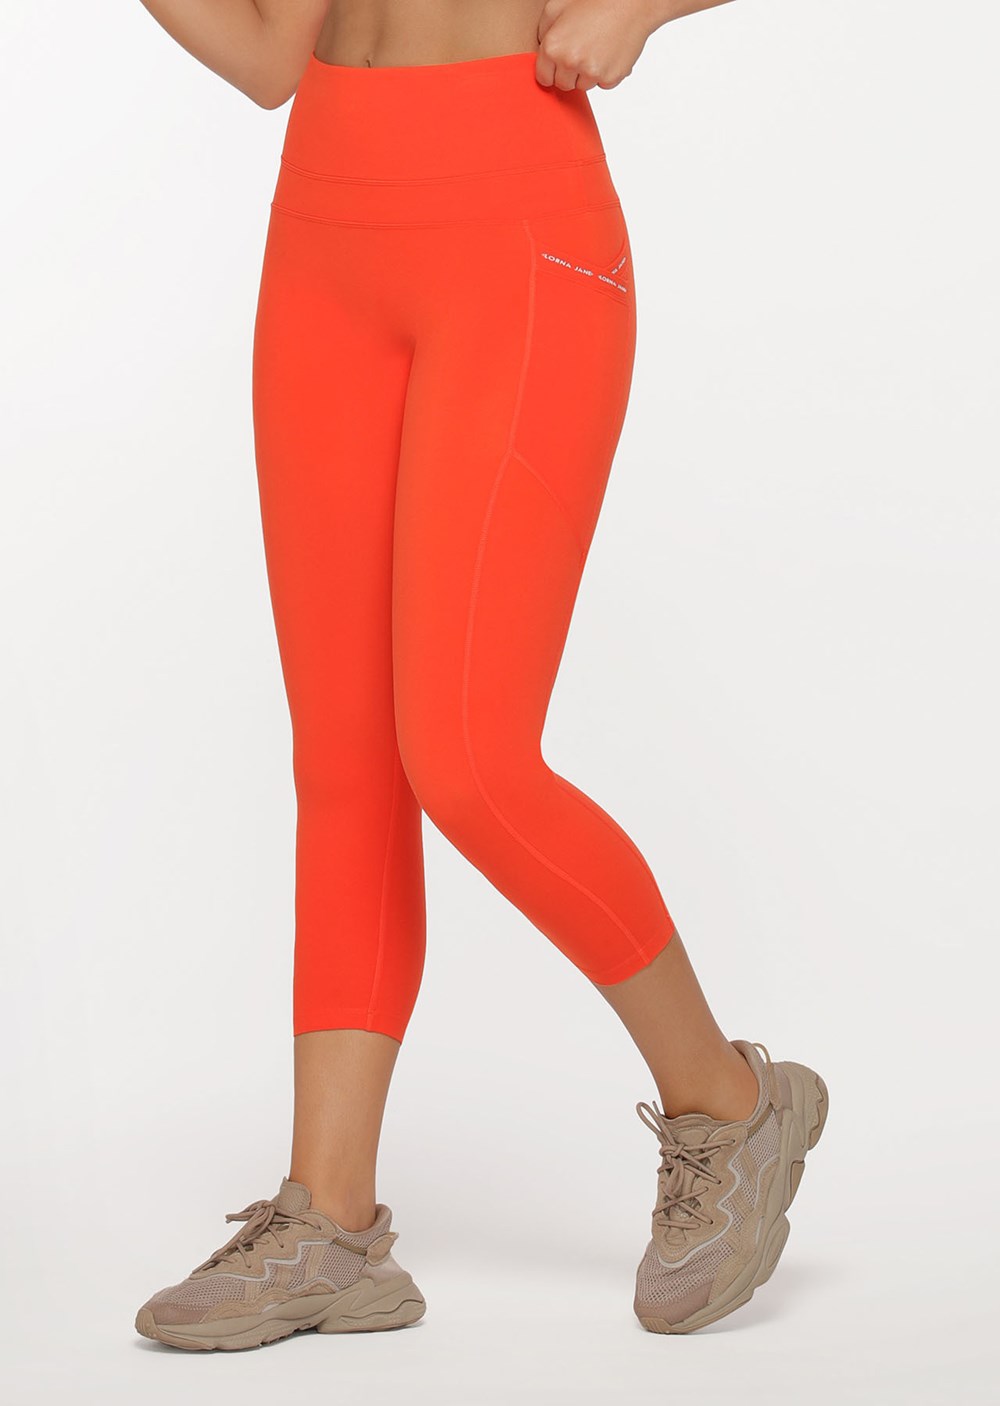 The Best Lorna Jane Leggings To Buy - Chilli No Ride Booty Pocket